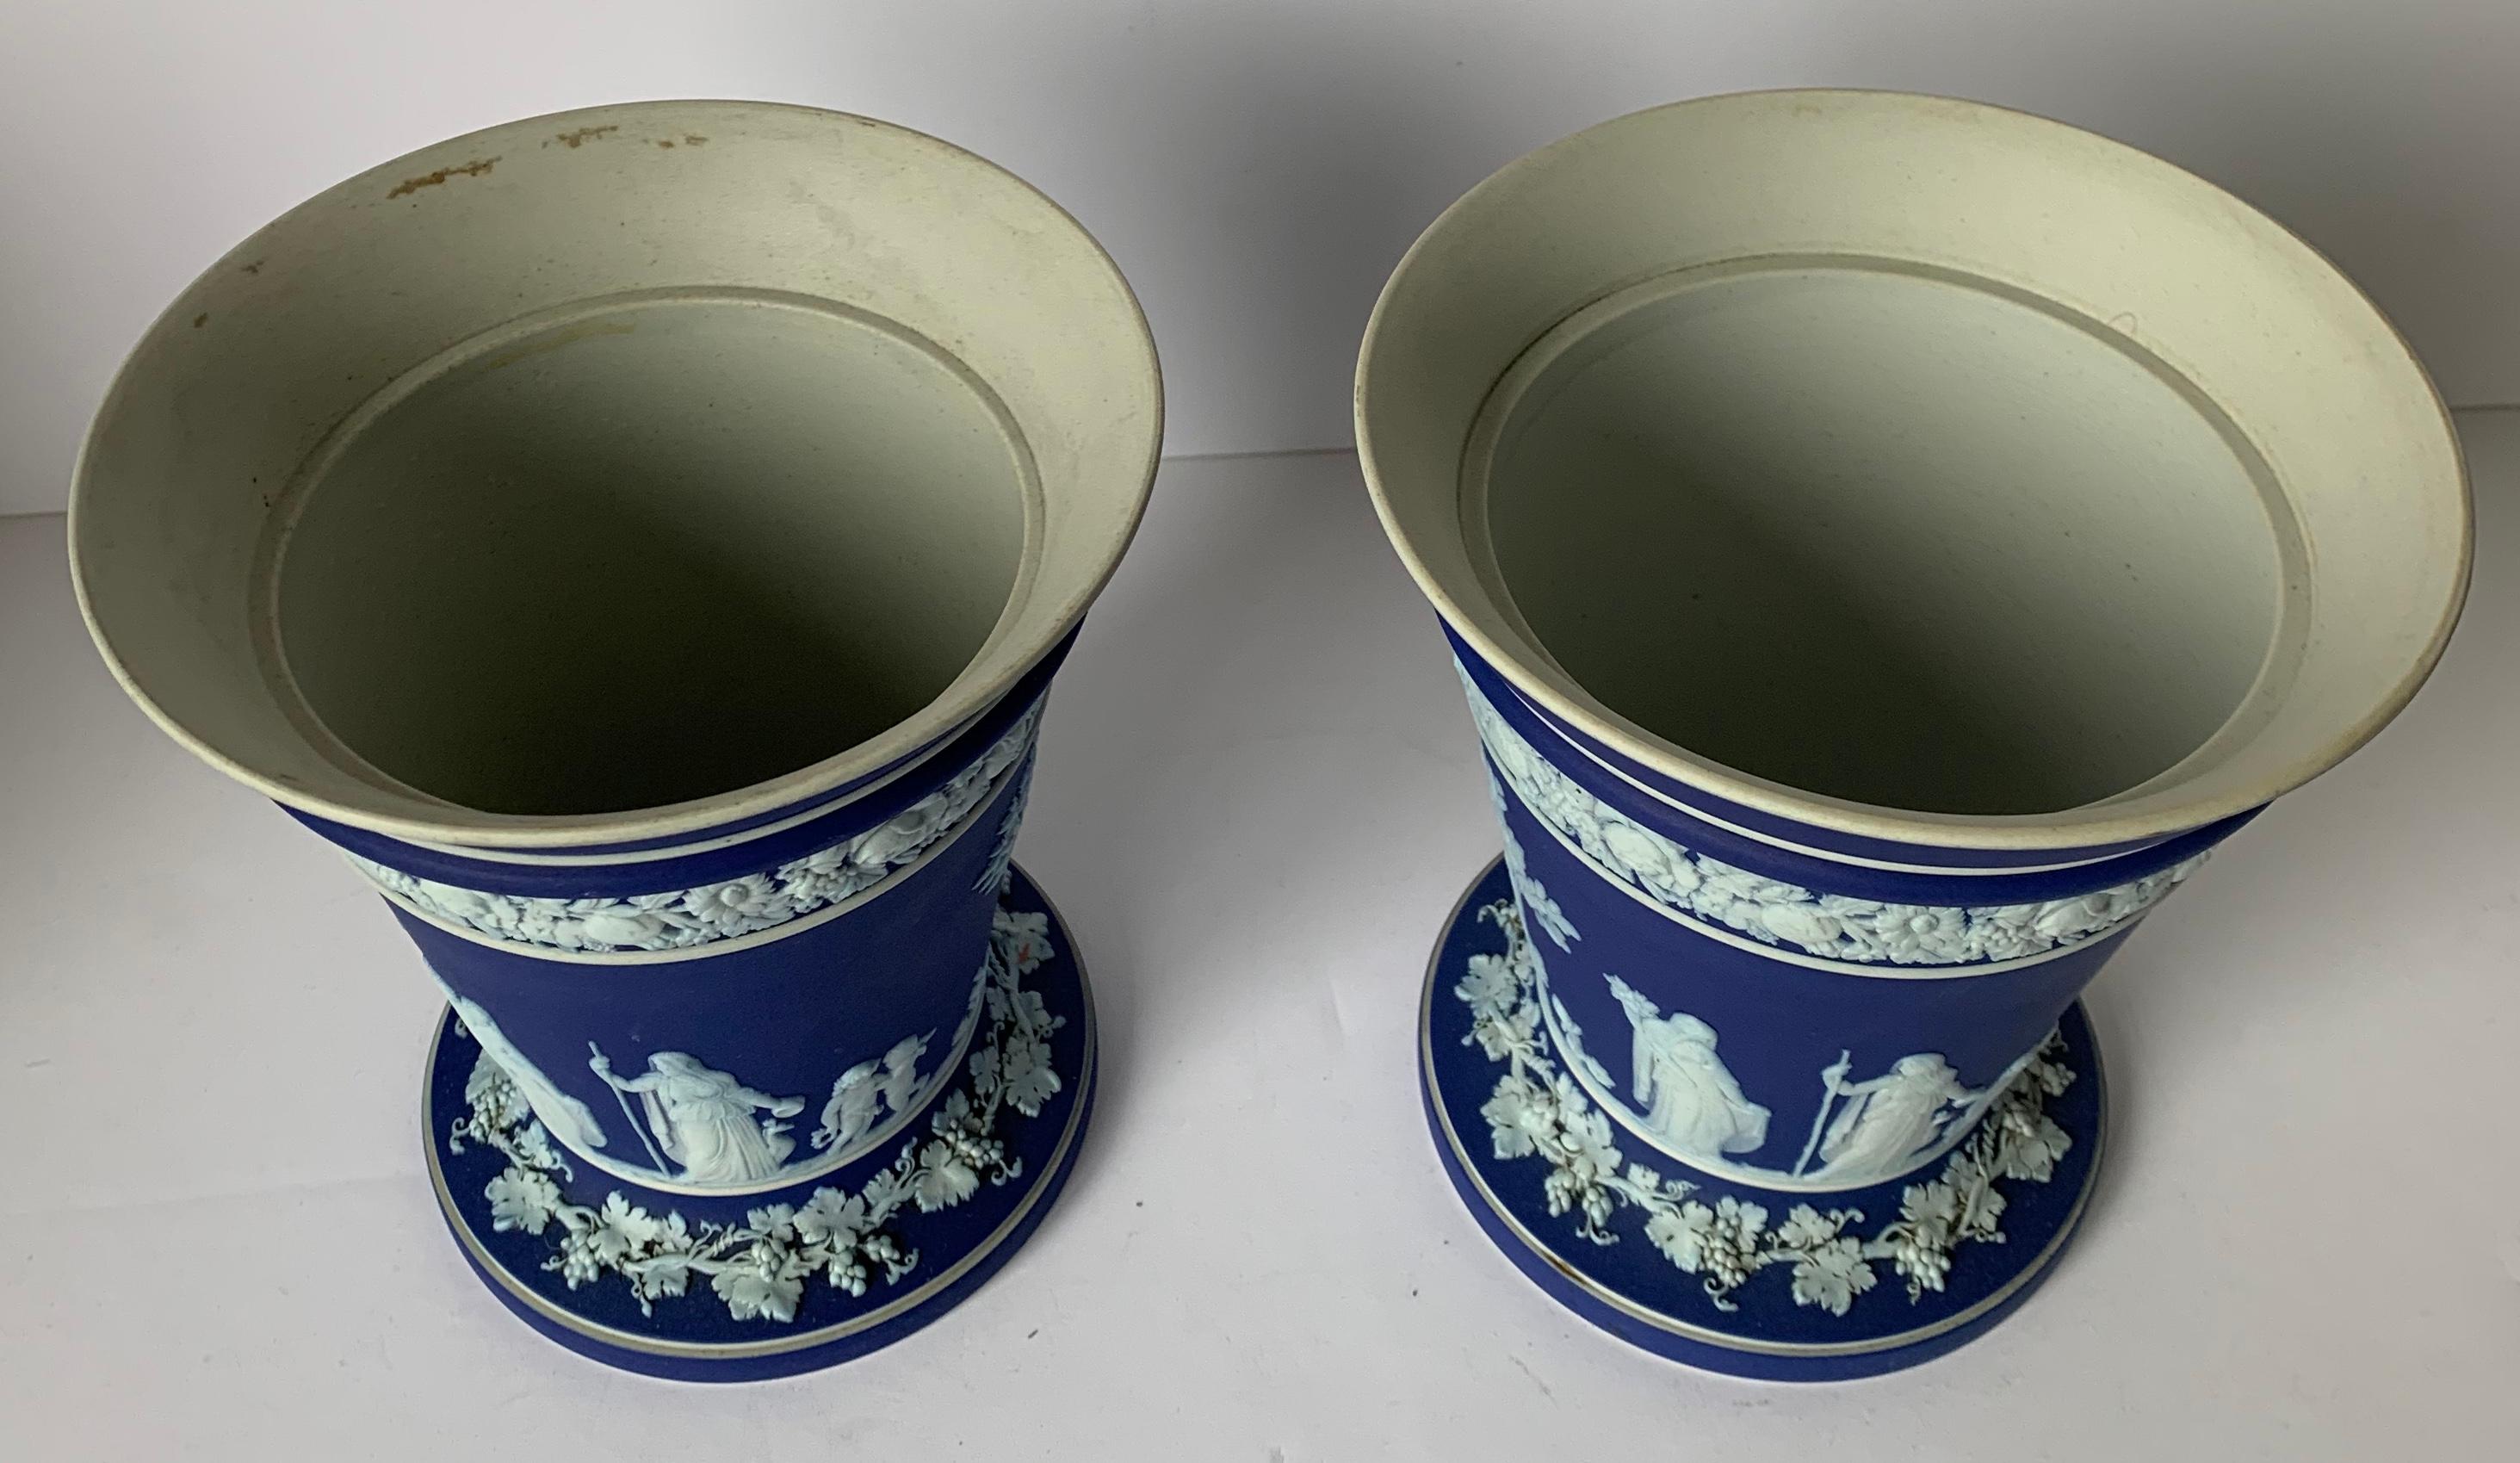 Pair of Wedgwood dark blue and white jasperware vases. Insides of vases have a shiny glazed finish. 6” tall x 5.5” across top x 4.5” across bottom. Stamped on the underside.